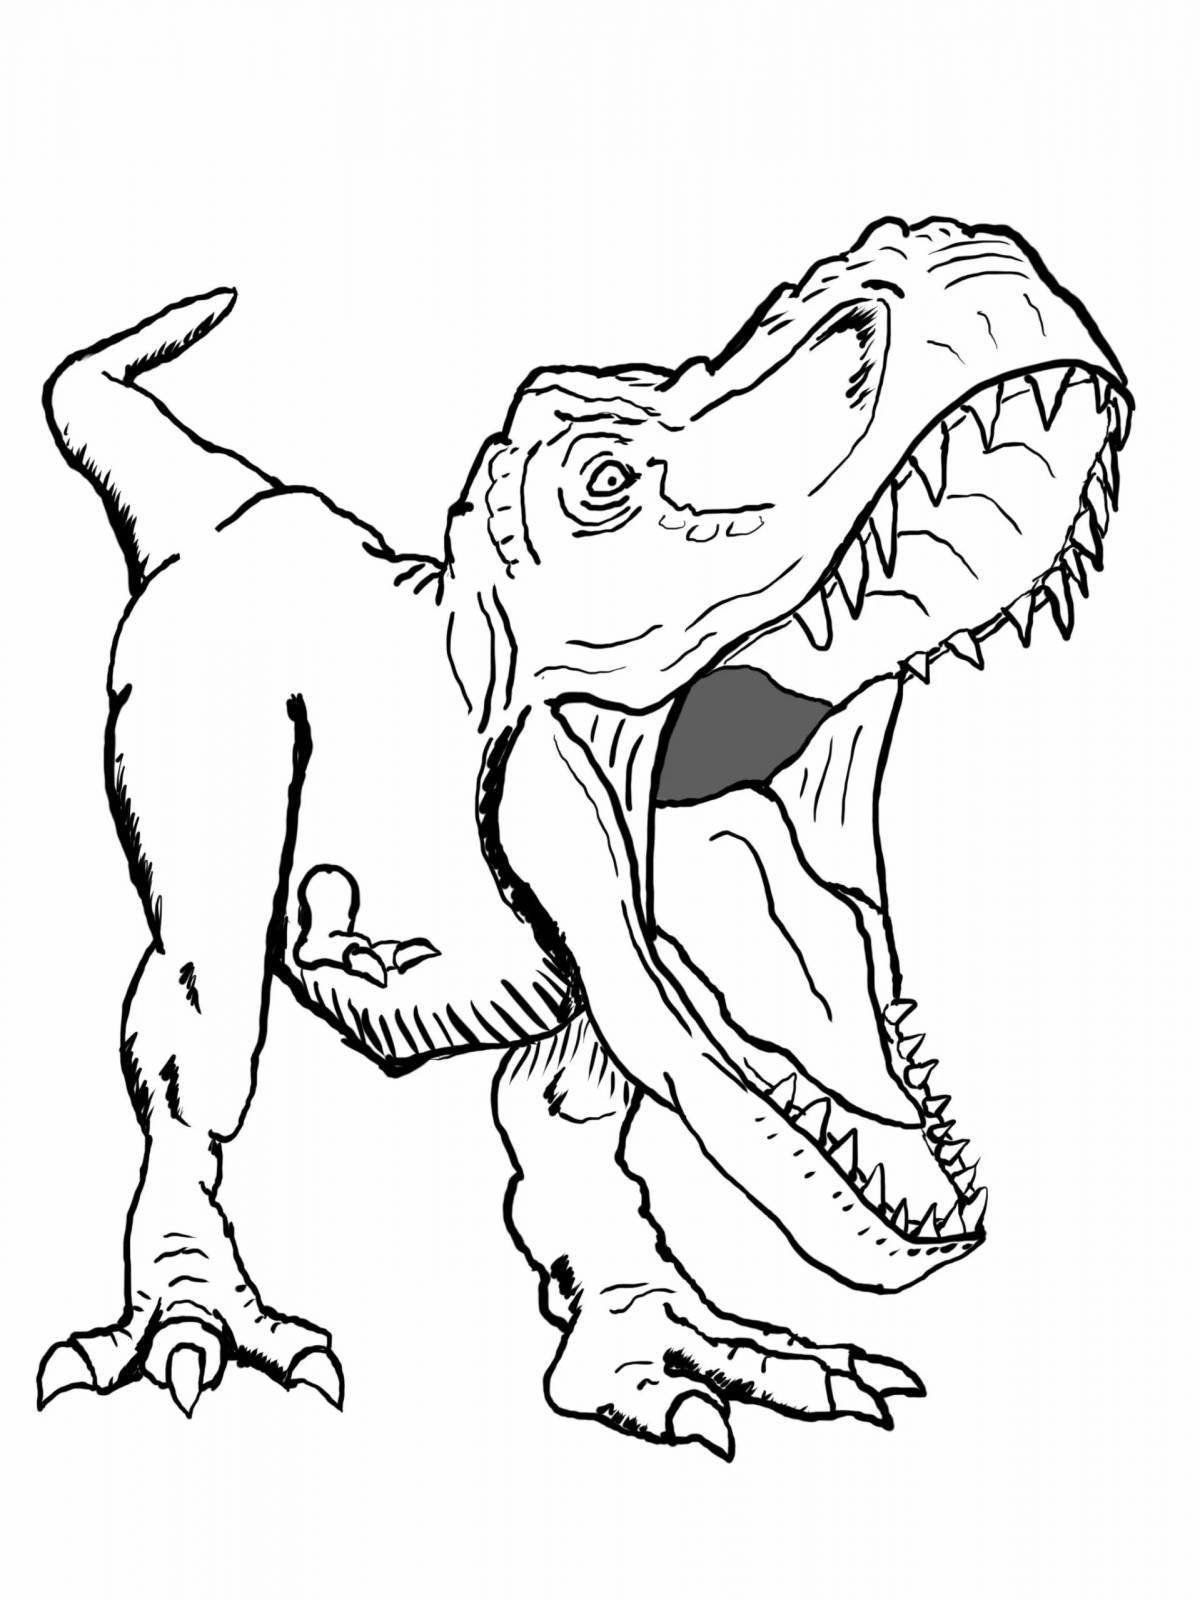 Bright coloring page rex